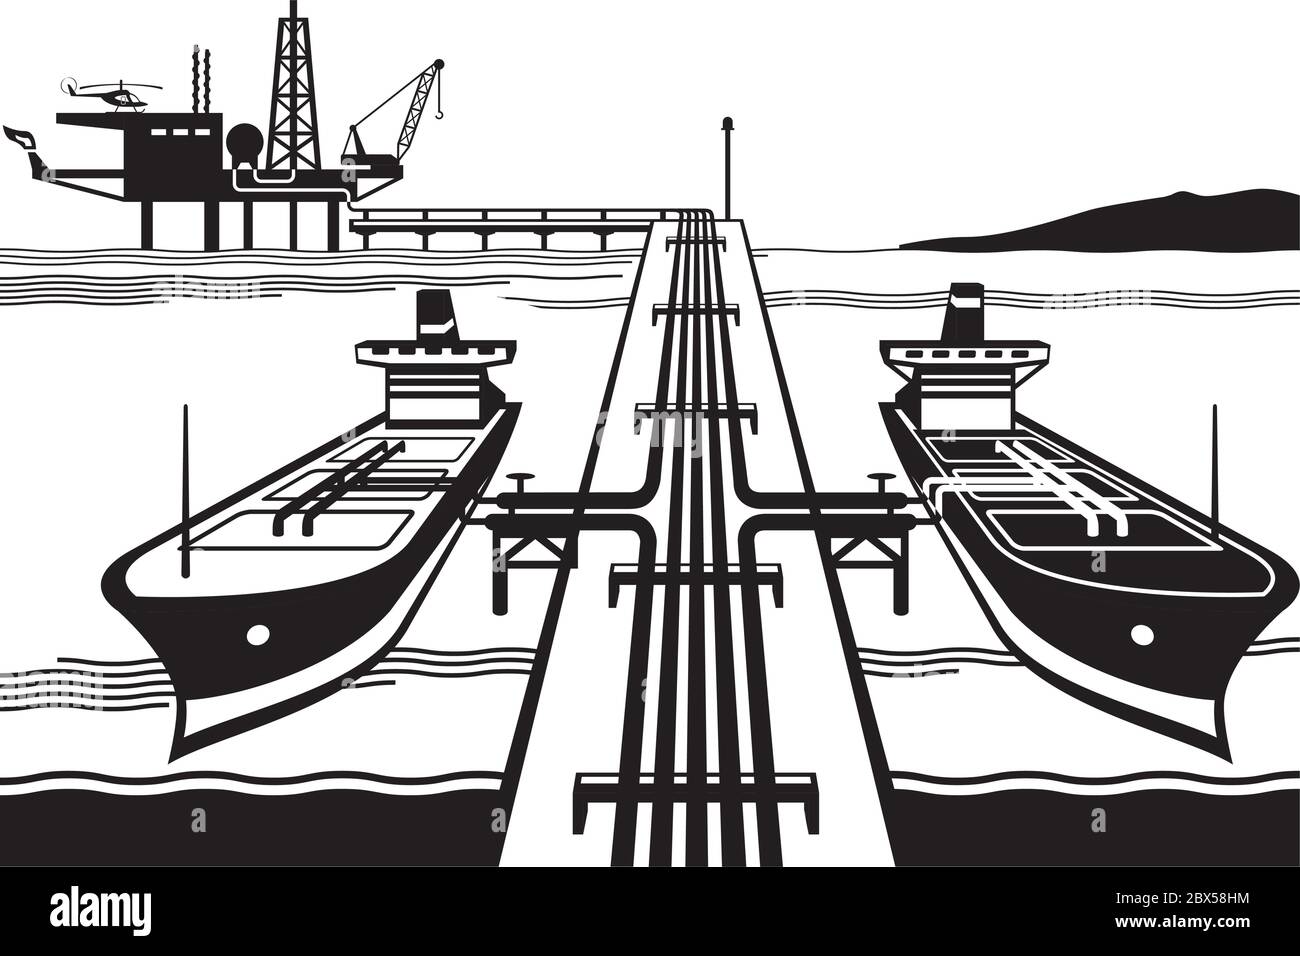 Tankers loading petrol from offshore oil rig - vector illustration Stock Vector